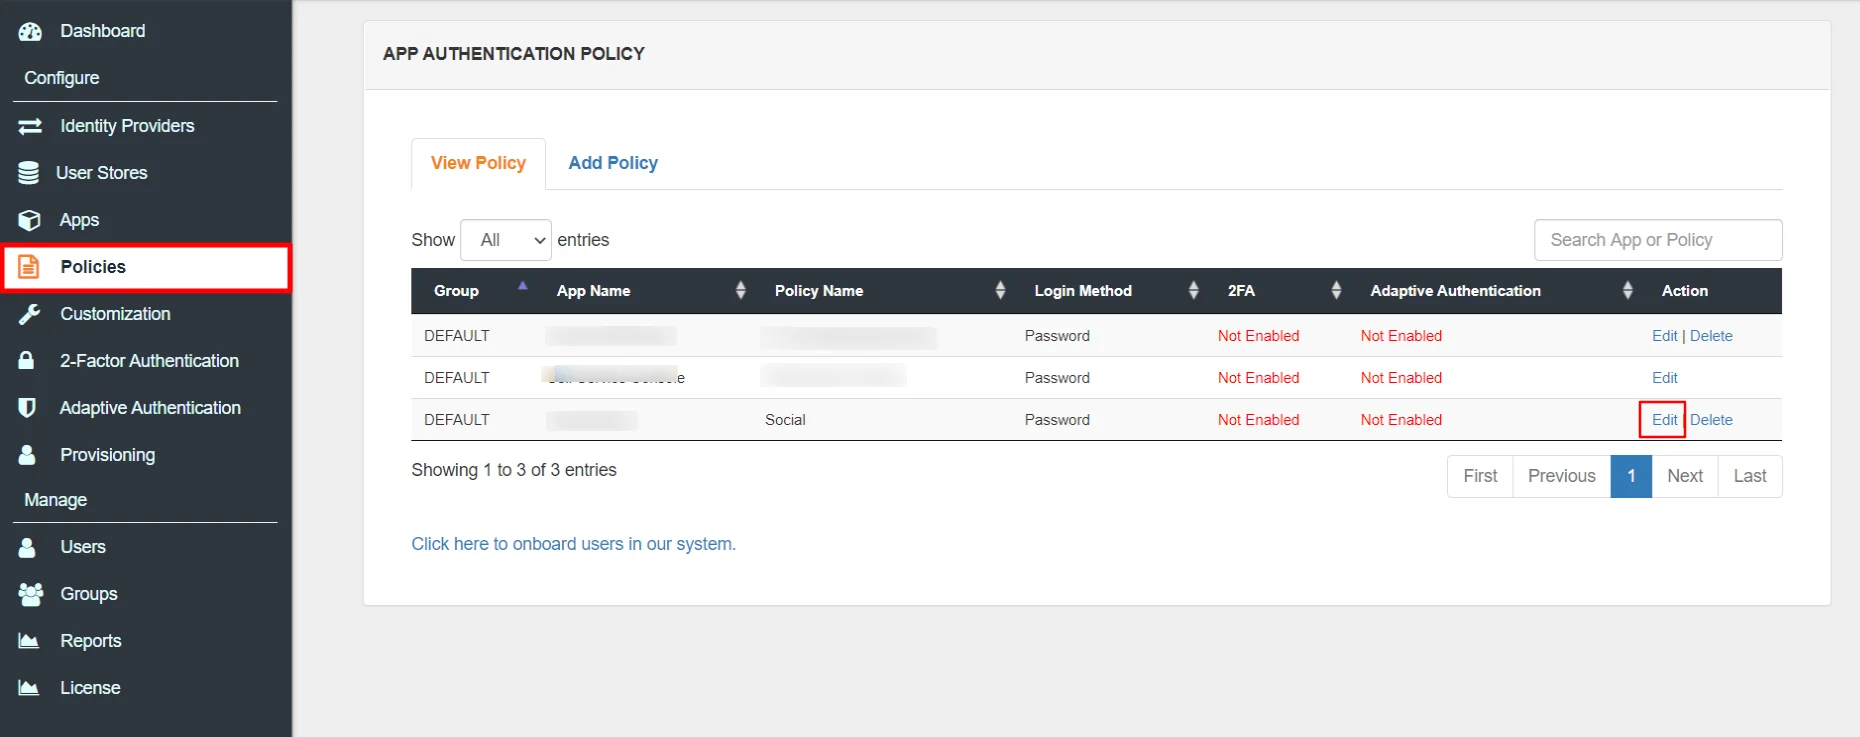 Amazon Web Services Single Sign-On (SSO) Restrict Access adaptive authnetication policy